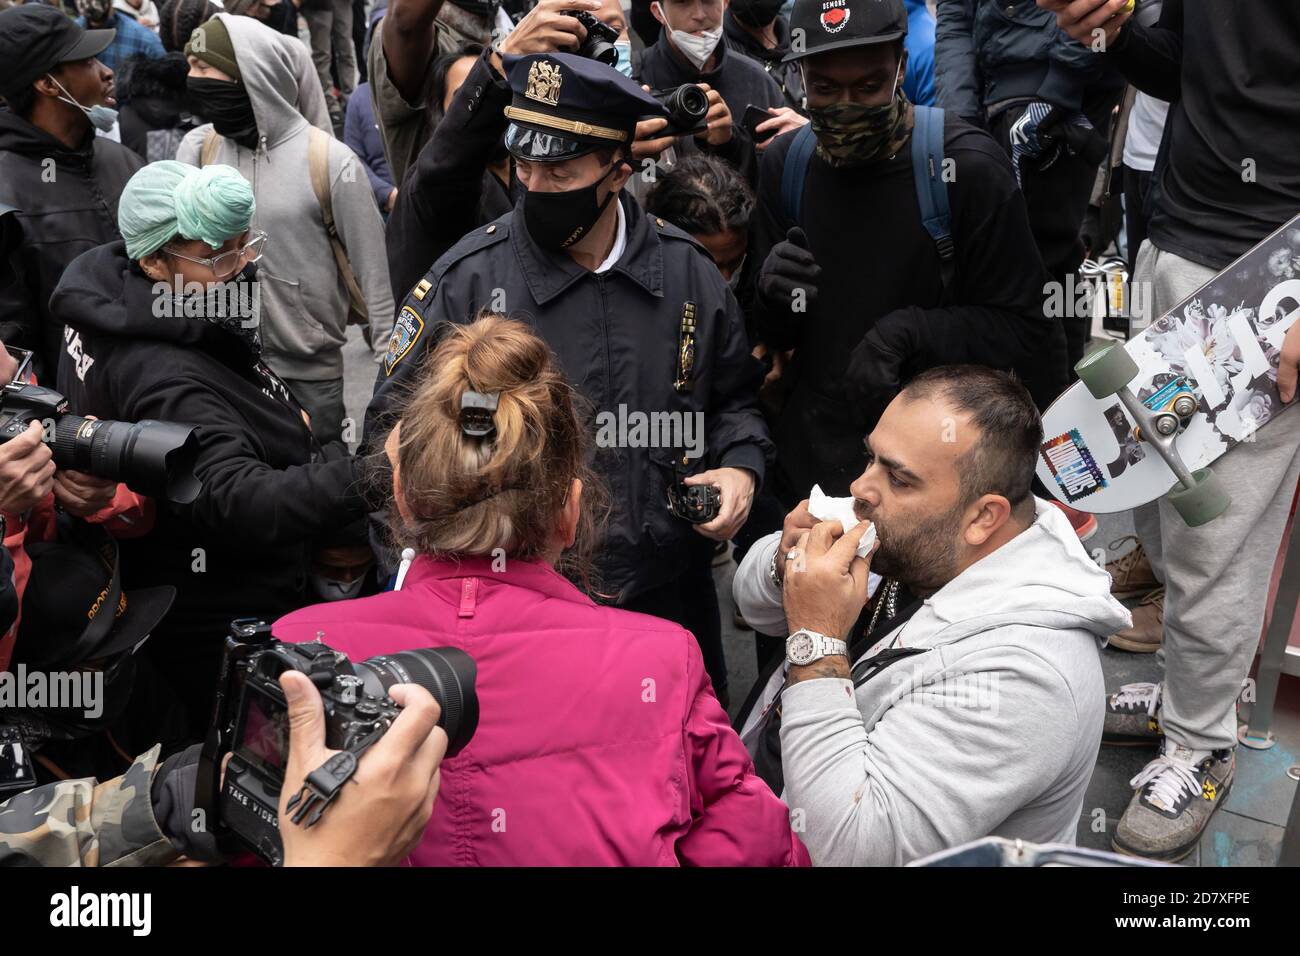 NEW YORK, NY – OCTOBER 25, 2020: A bloodied Pro-Trump Supporter seats in Times Square as NYPD Police Officers calls for a medical assistance. Stock Photo